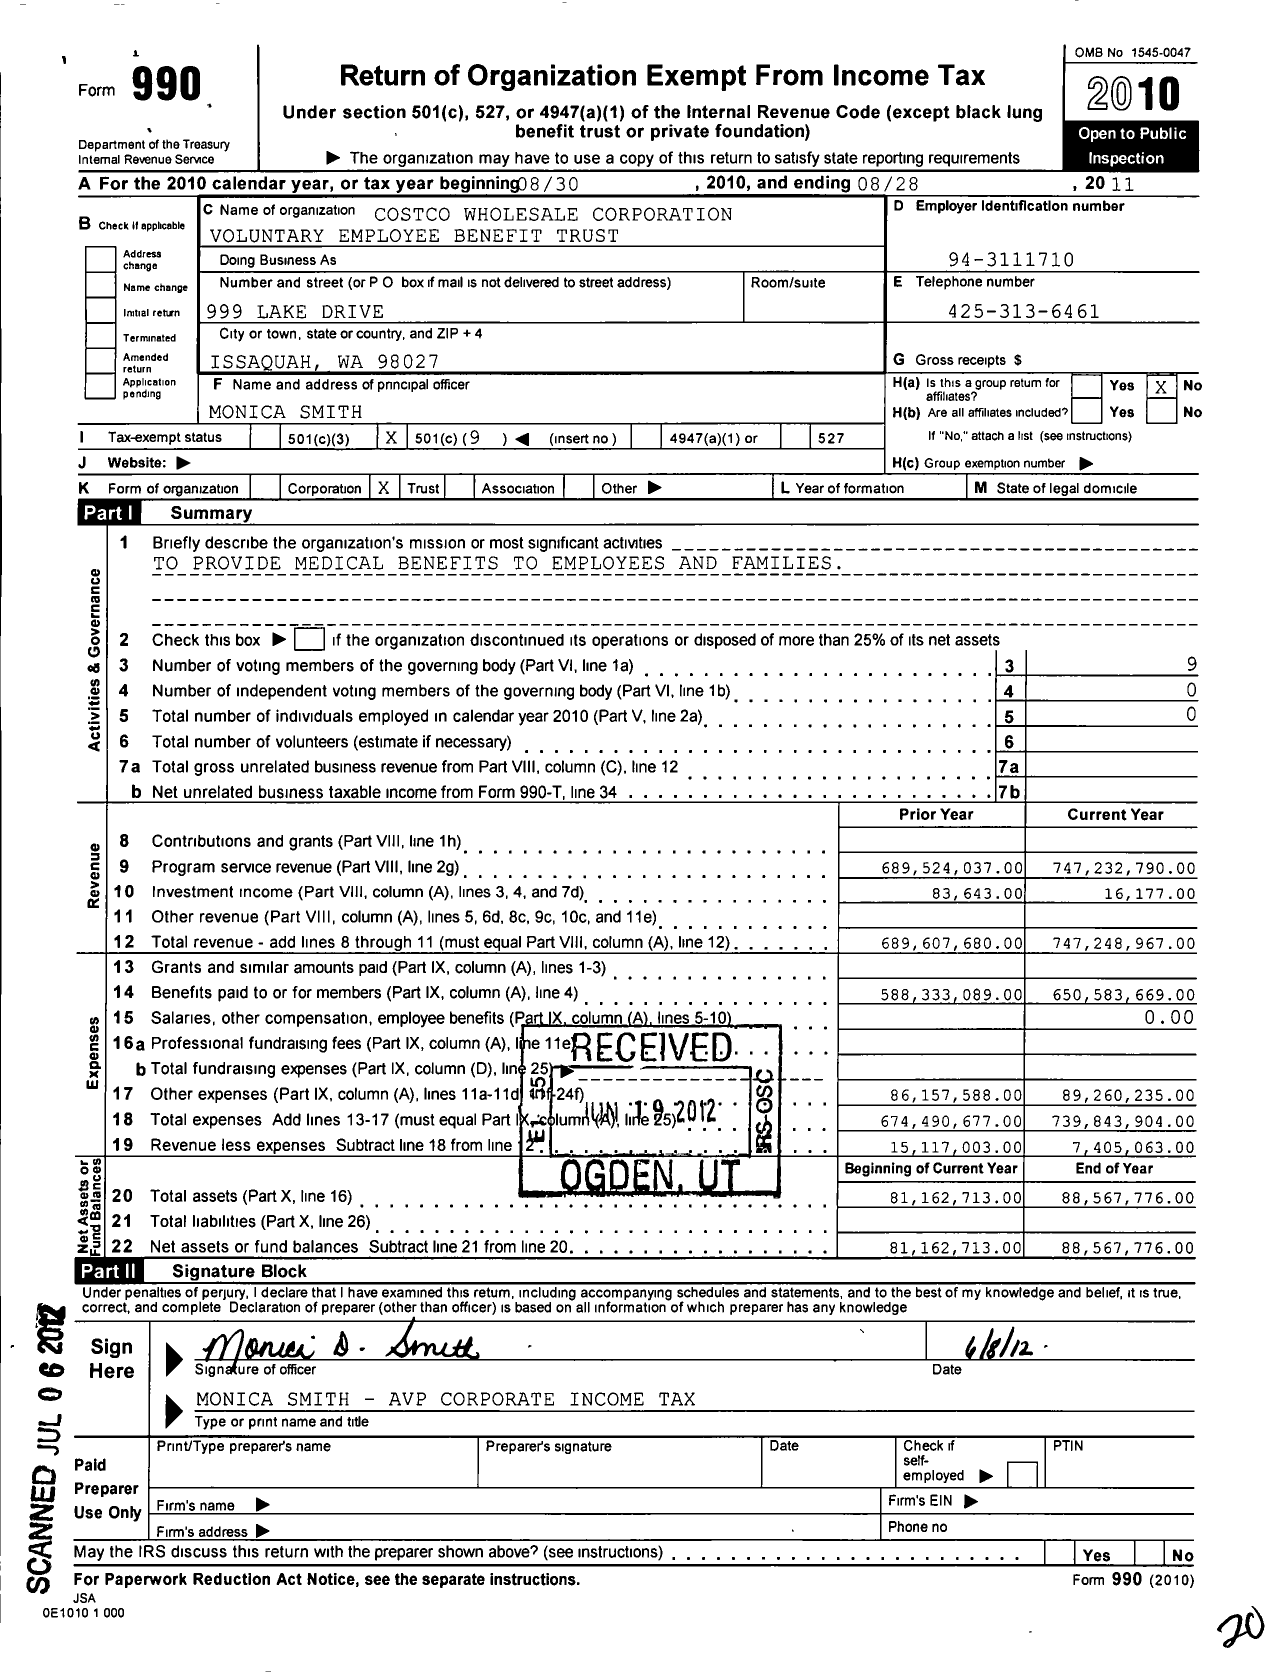 Image of first page of 2010 Form 990O for Costco Wholesale Corporation Voluntary Employee Benefit Trust